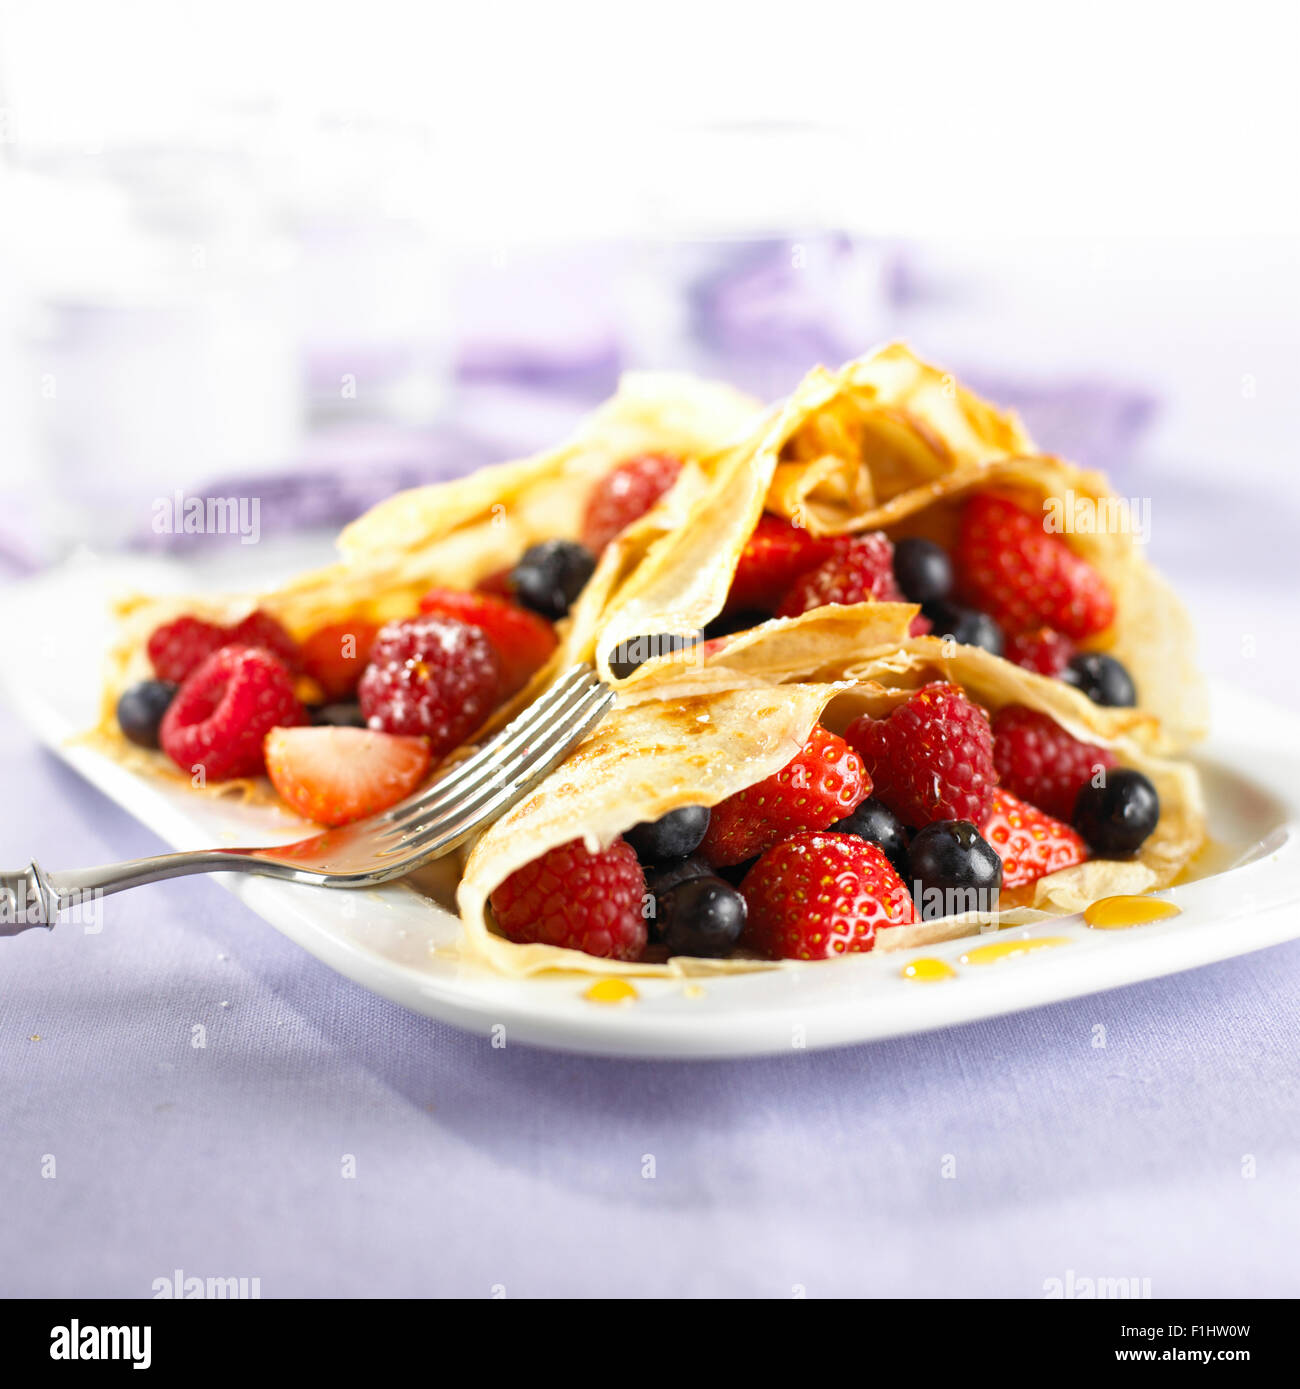 Pancakes filled with fruit Stock Photo